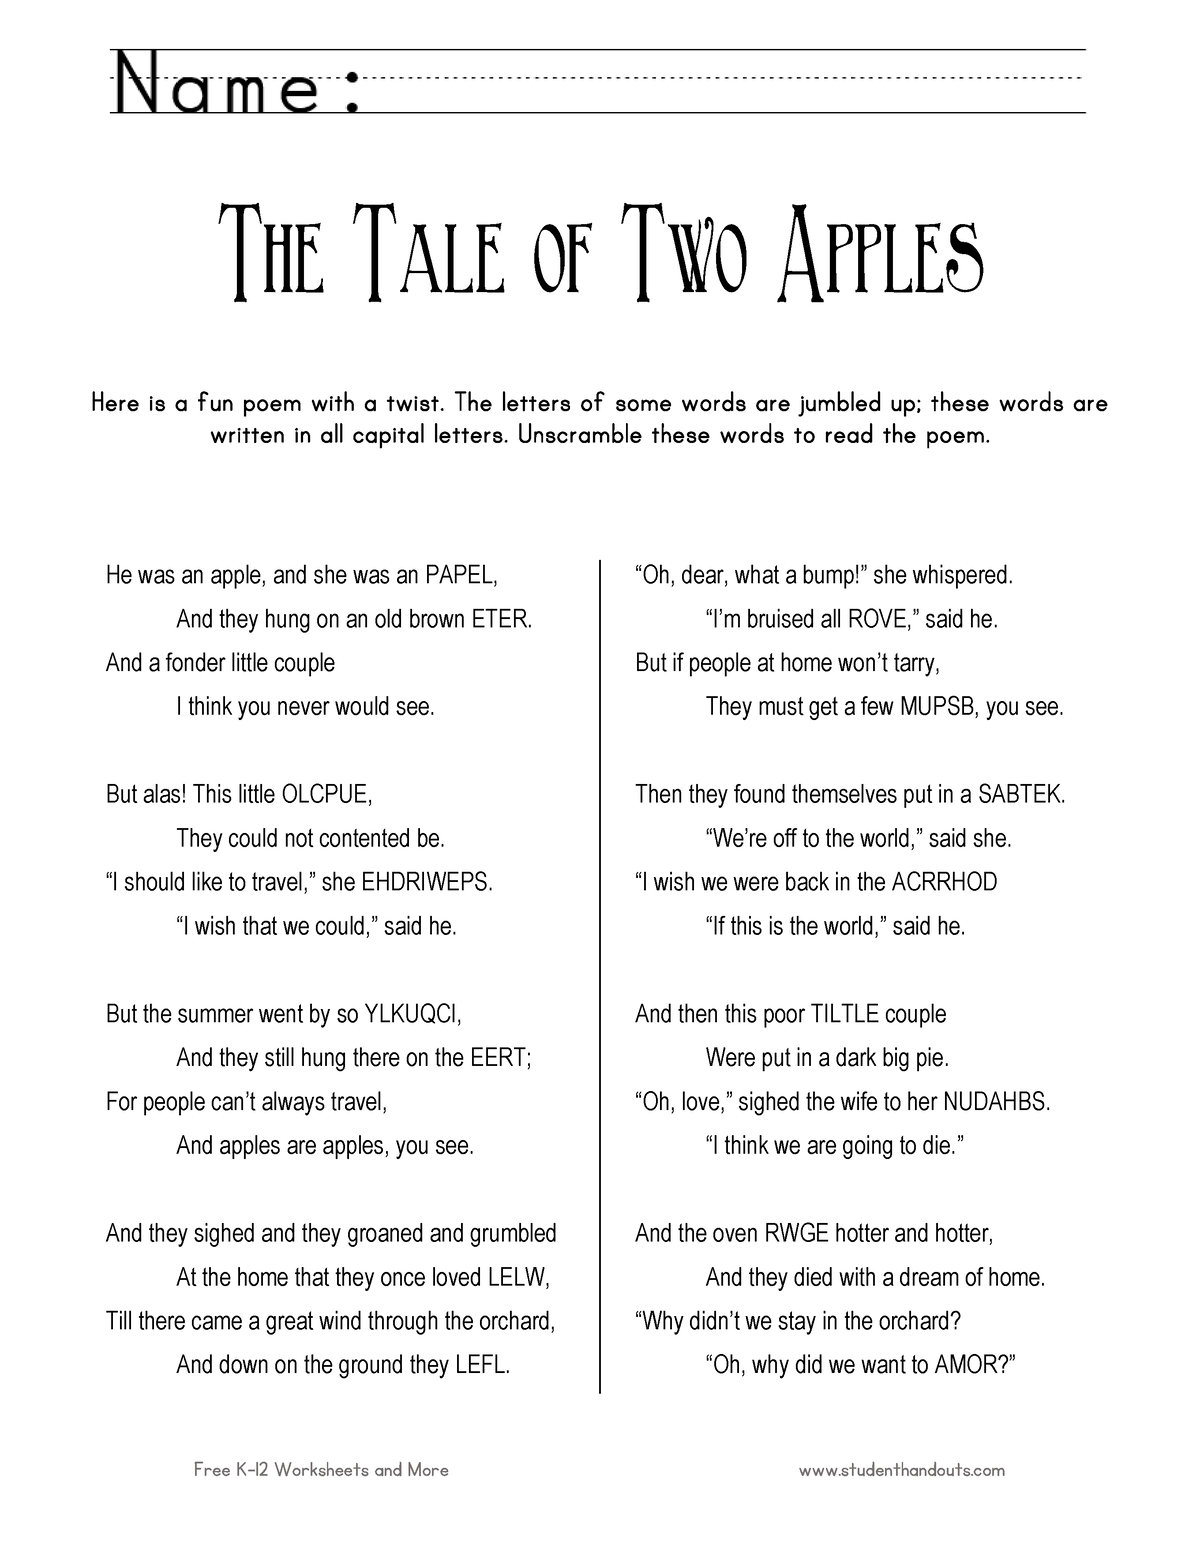 tale-of-two-apples-poem-scramble-free-k-12-worksheets-and-more